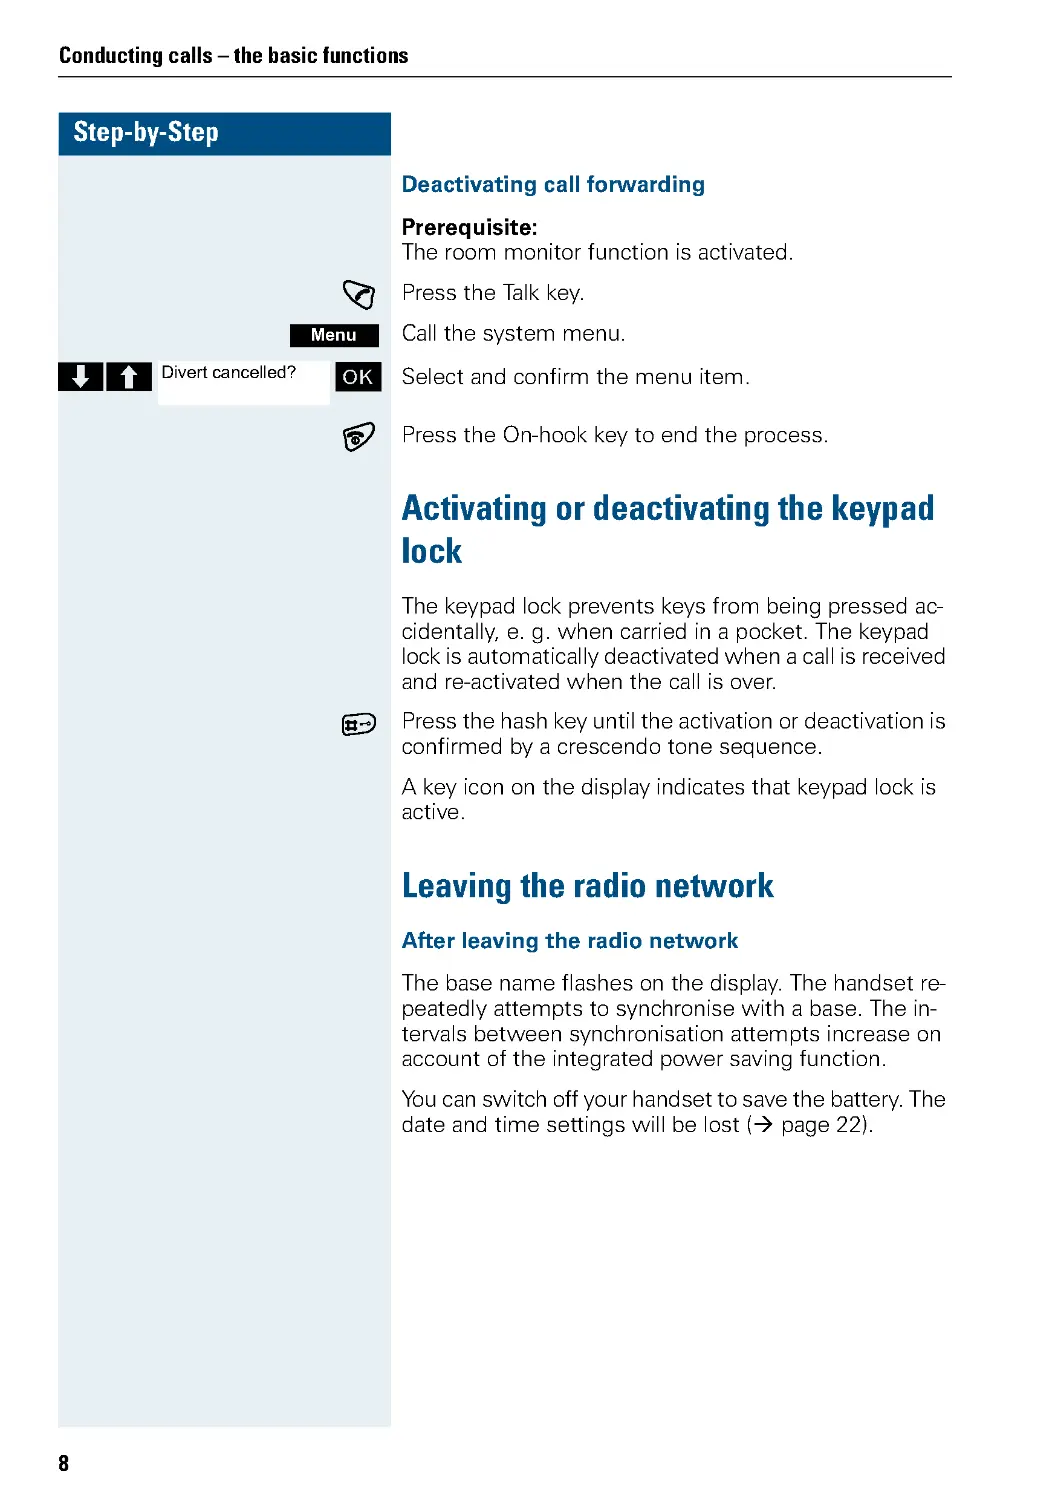 Activating or deactivating the keypad lock
Leaving the radio network